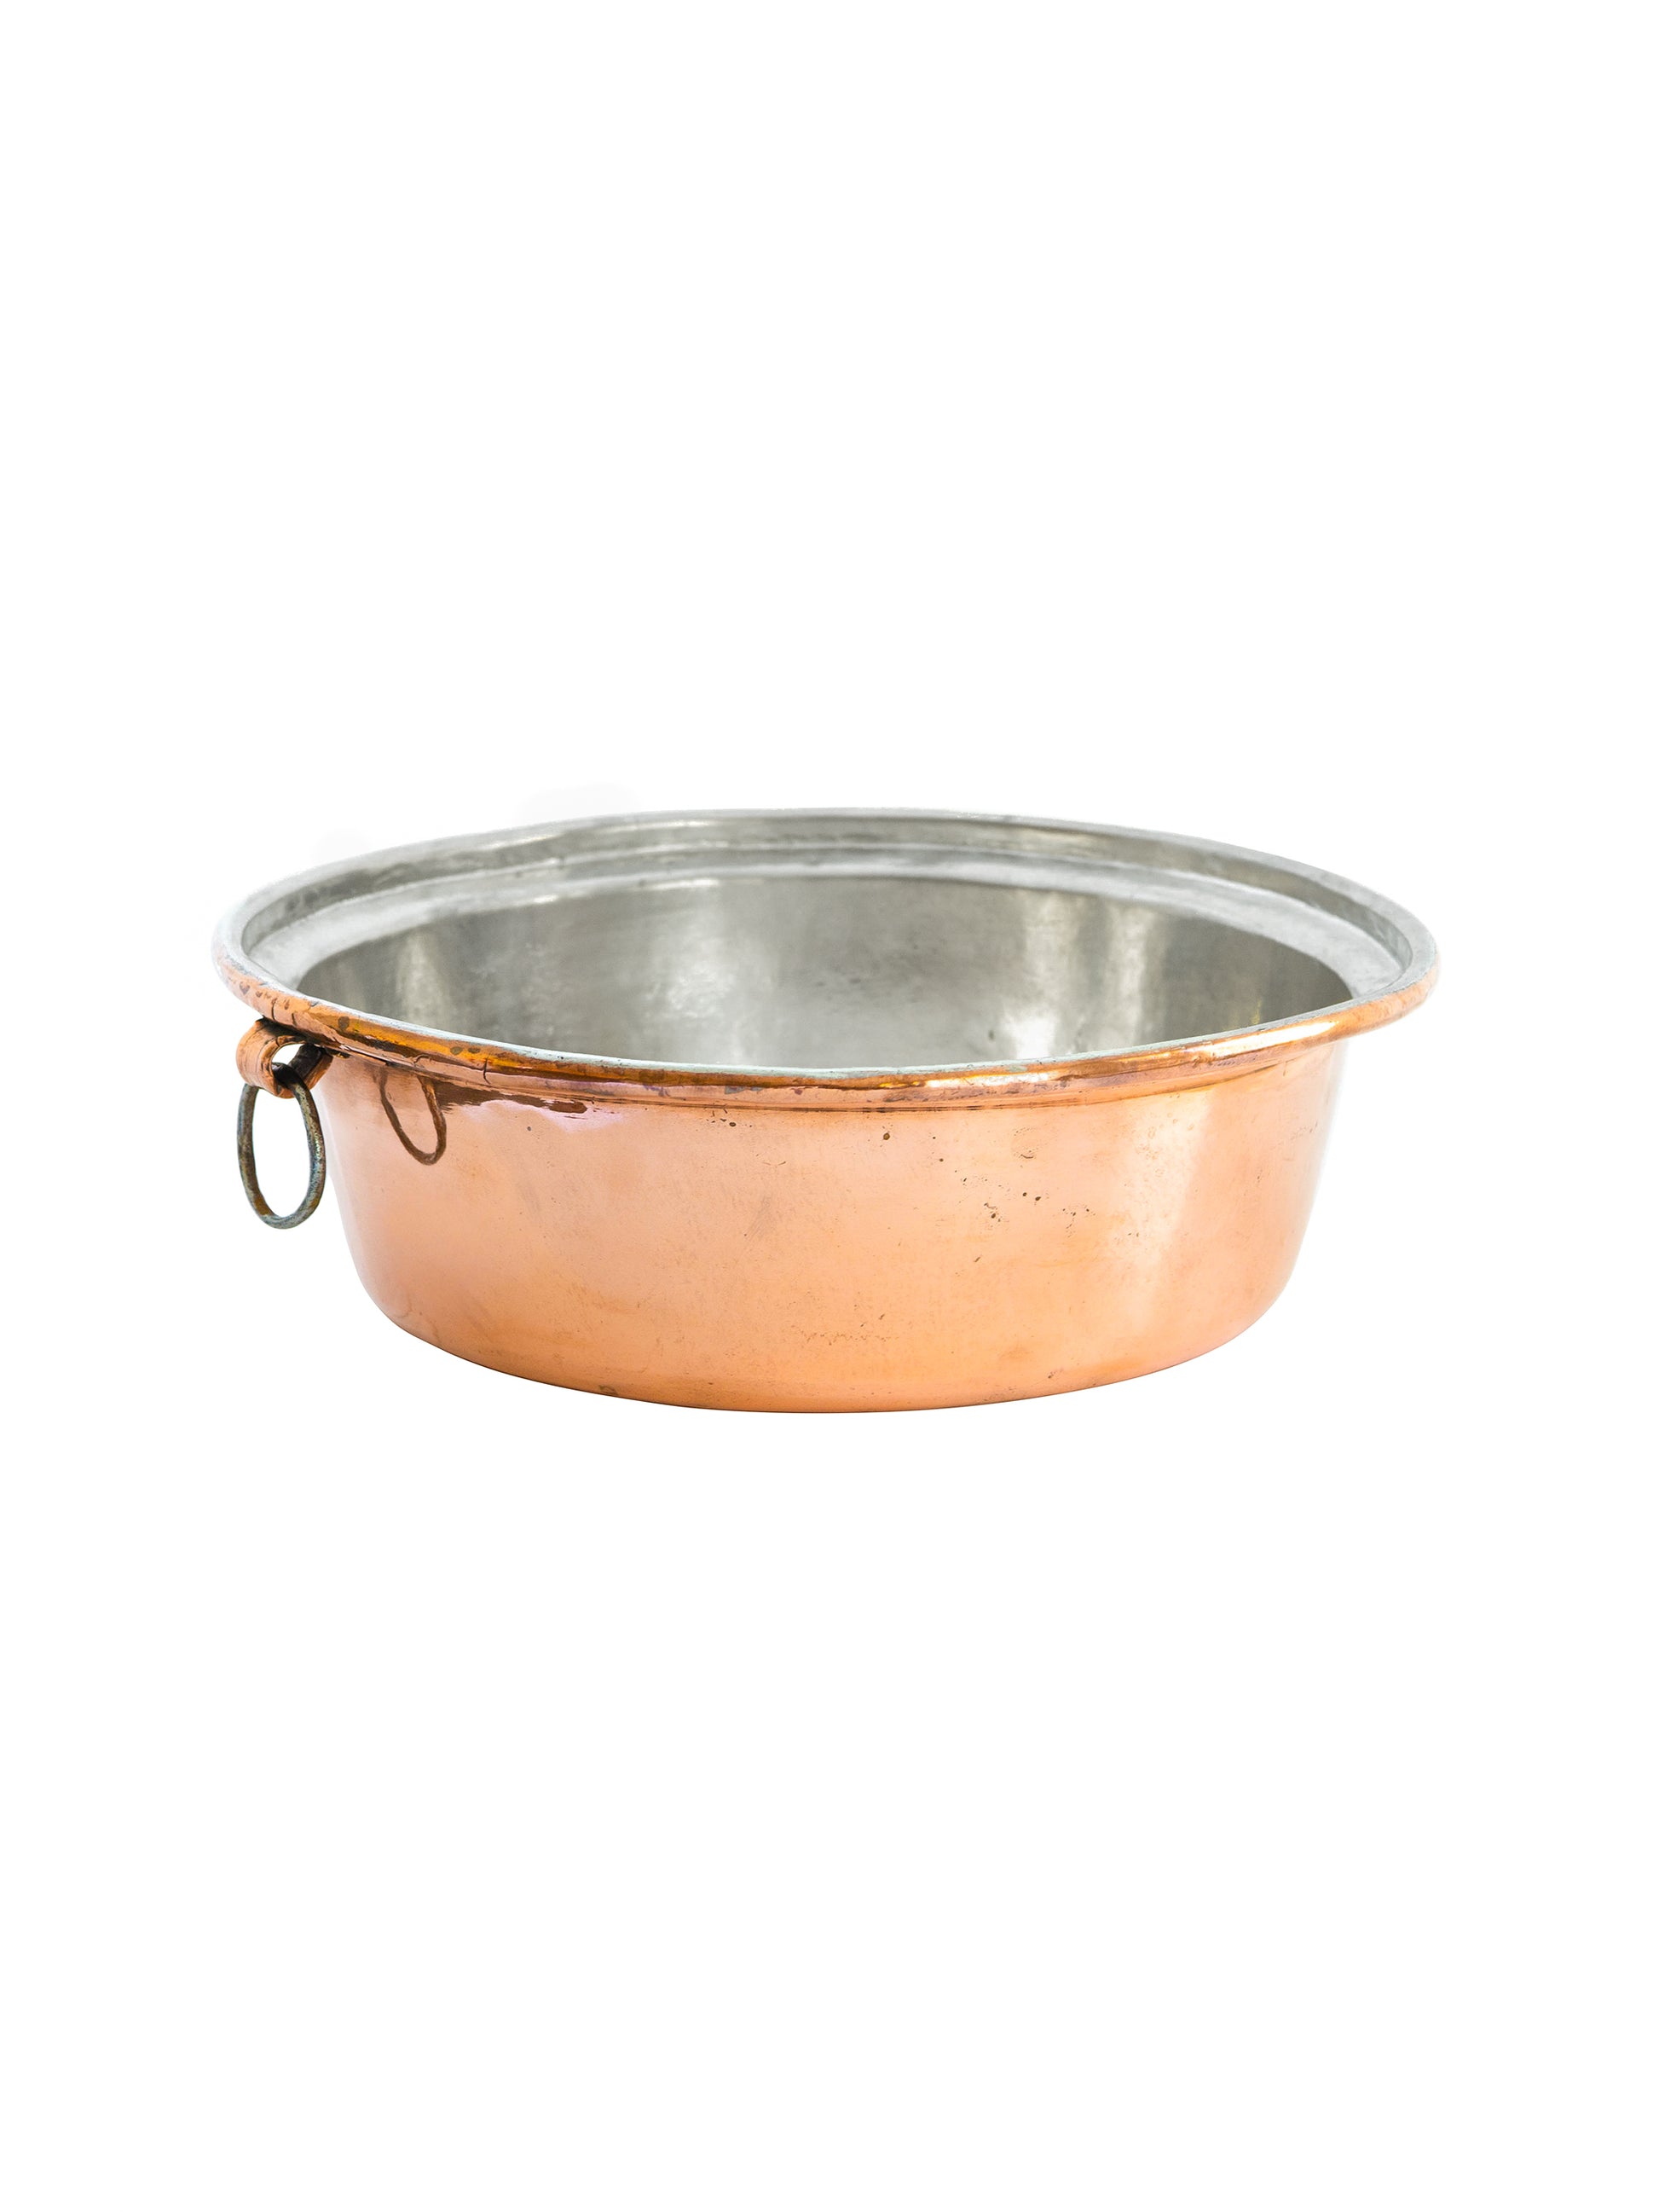 https://westontable.com/cdn/shop/products/Vintage-1880s-French-Copper-Mixing-Bowl-Weston-Table.jpg?v=1667487176&width=1946